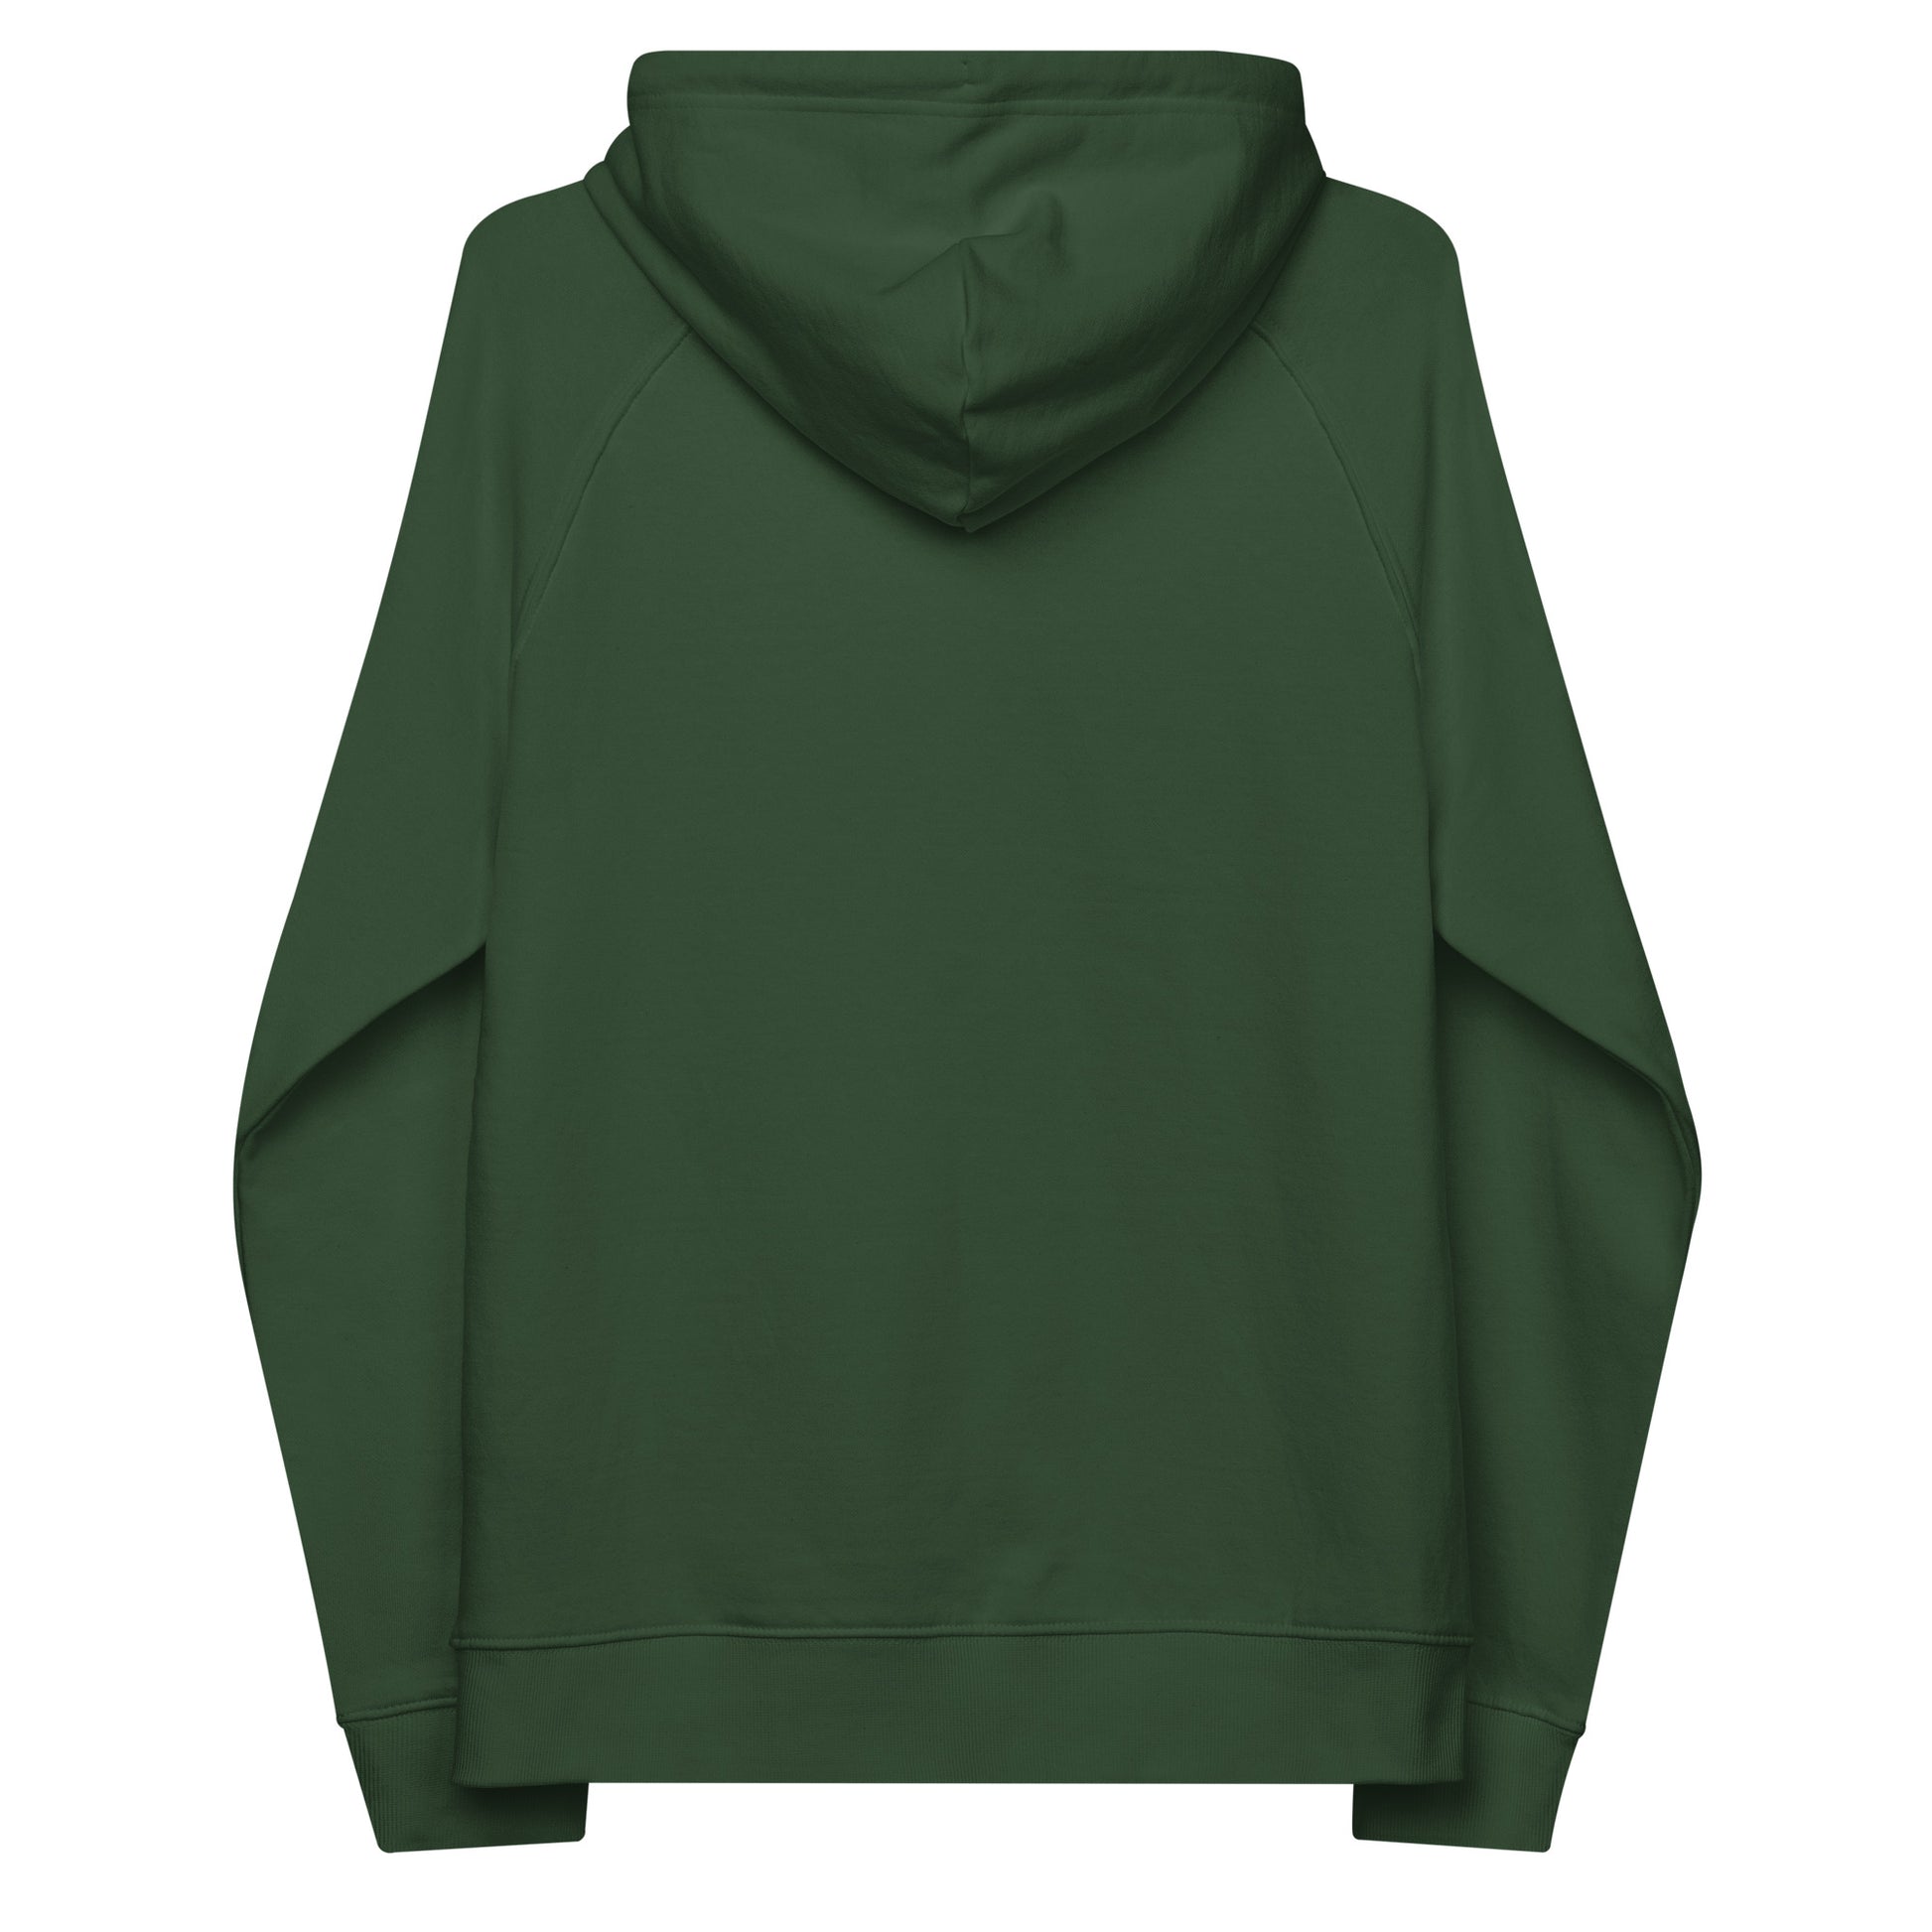 City Organic Hoodie - Old Gold • YQT Thunder Bay • YHM Designs - Image 09